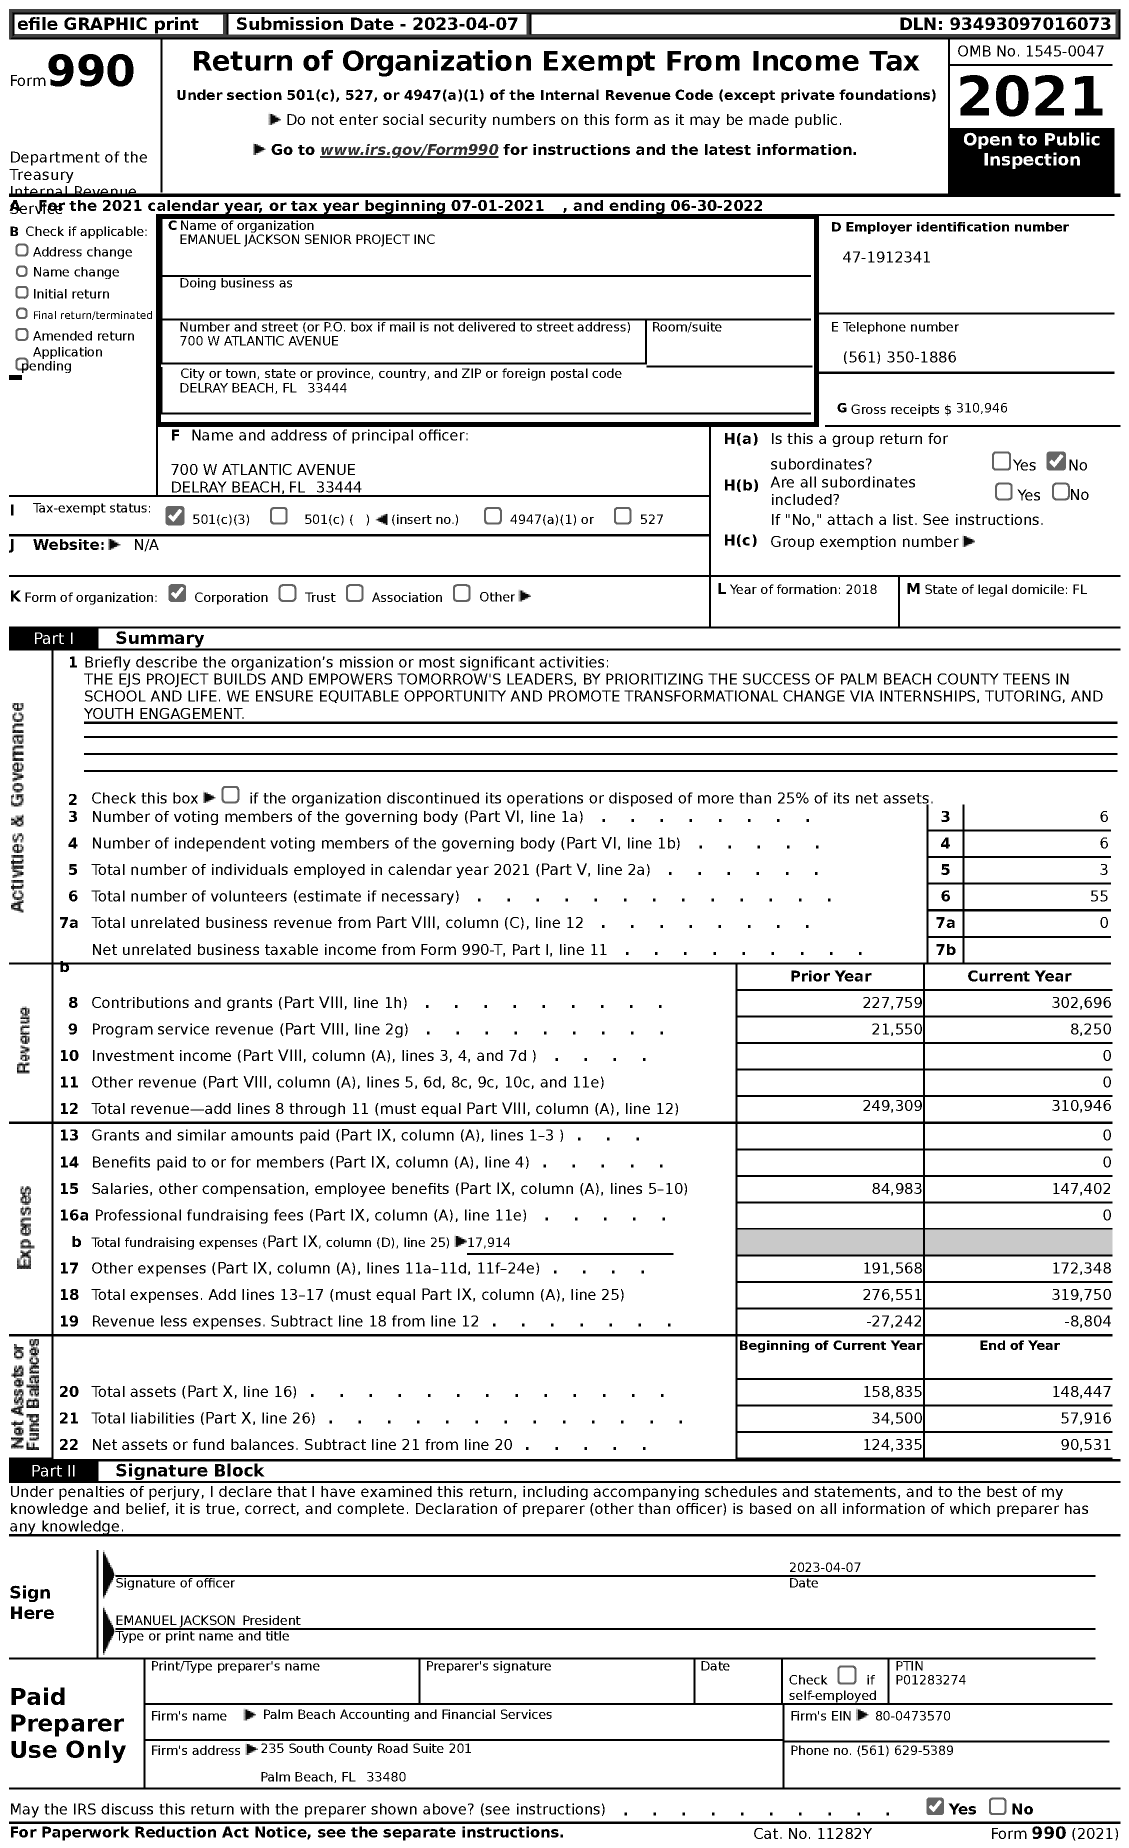 Image of first page of 2021 Form 990 for Emanuel Jackson Senior Project